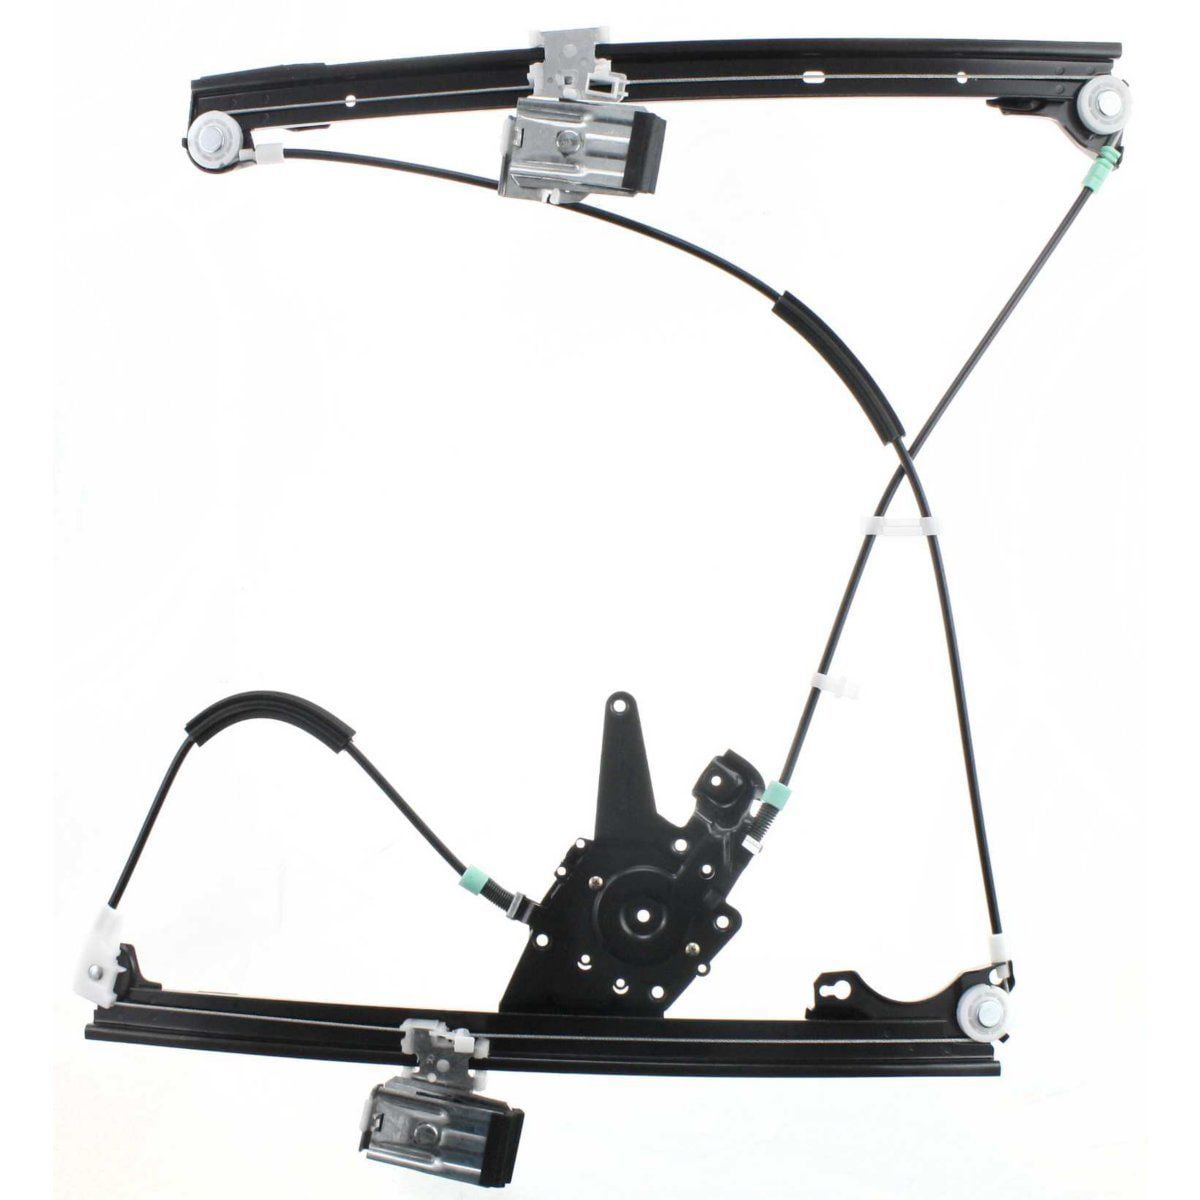 Power Window Lift Regulator on Front Right Passengers Side Replacement for 1993-1999 Volkswagen Golf/Jetta 1H0837462A NO Motor Assembly 